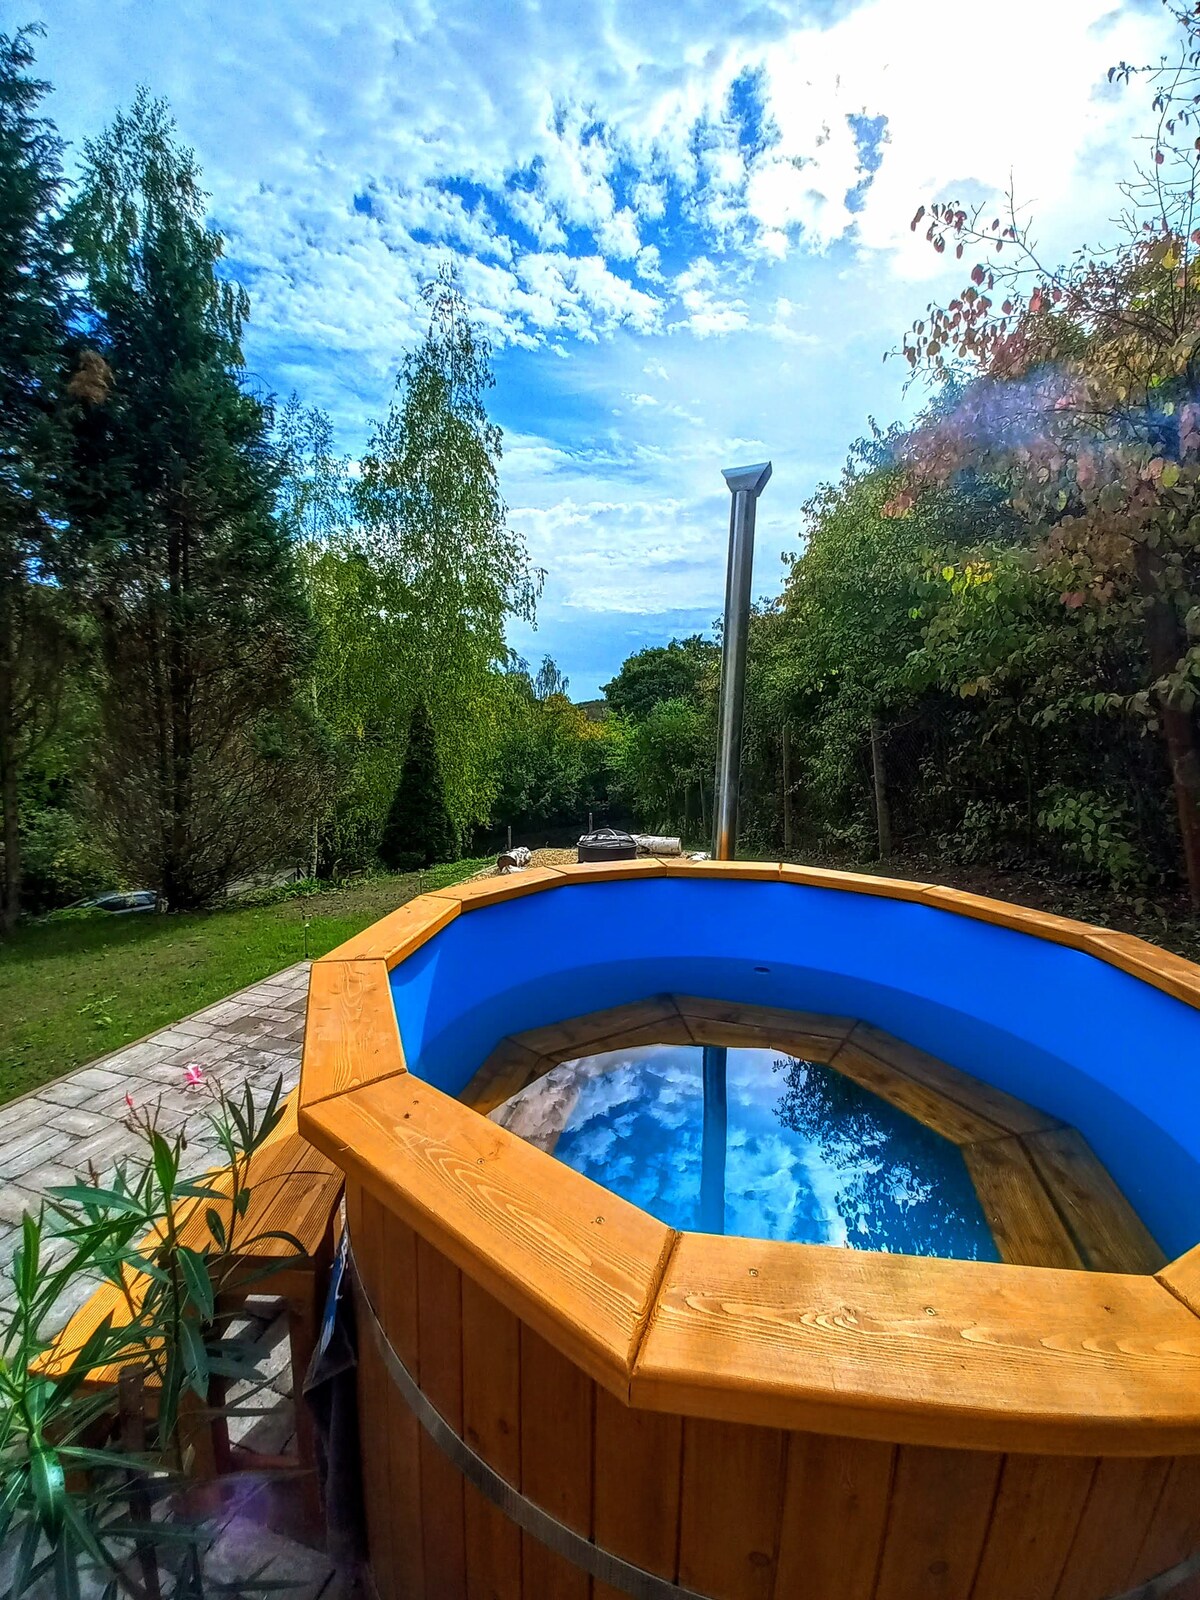 Hot tub, romance, just you - The WoodHouse